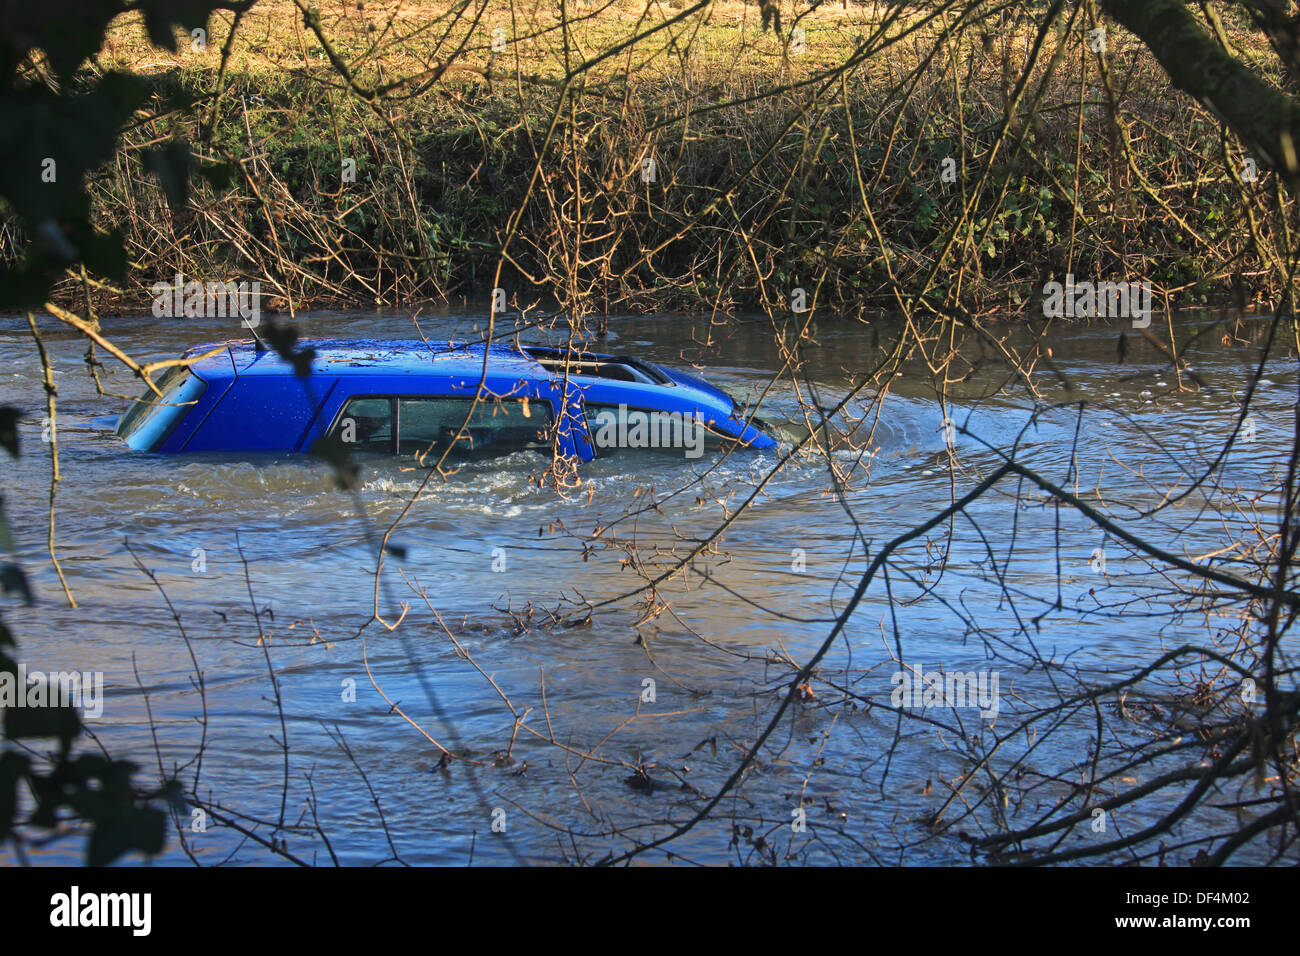 A small Blue car trapped and partially submerged in a fast flowing swollen river. Stock Photo